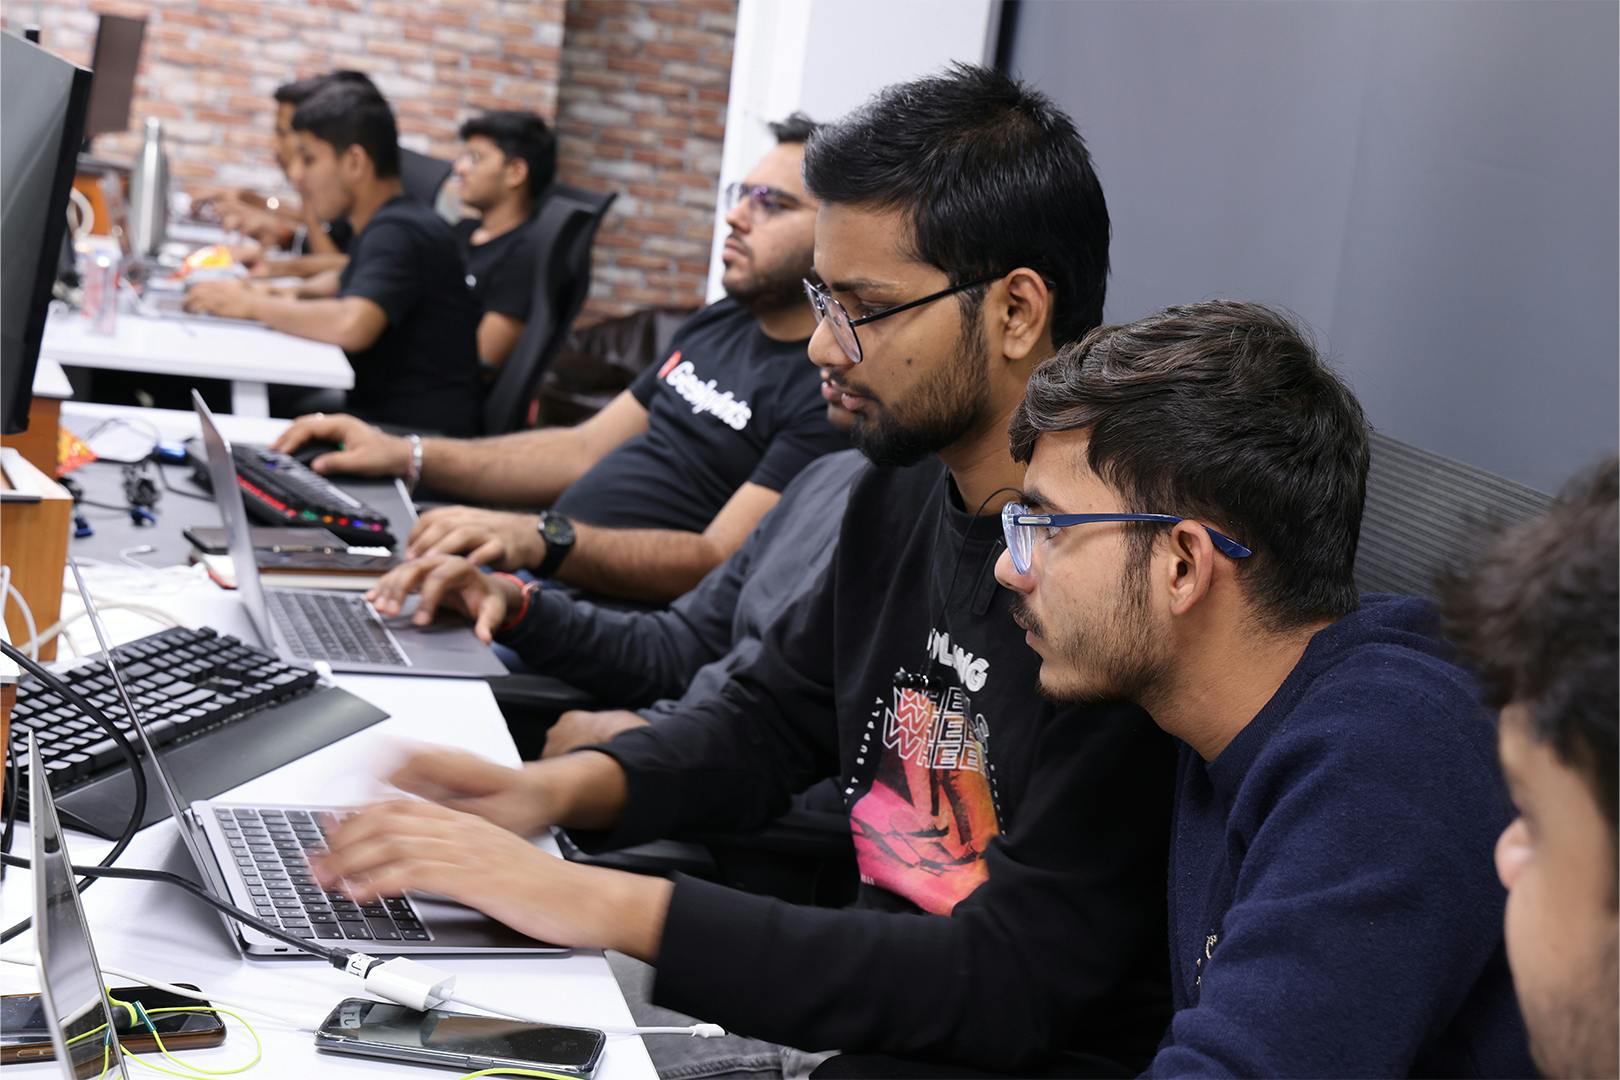 Participants on the day of Hackathon